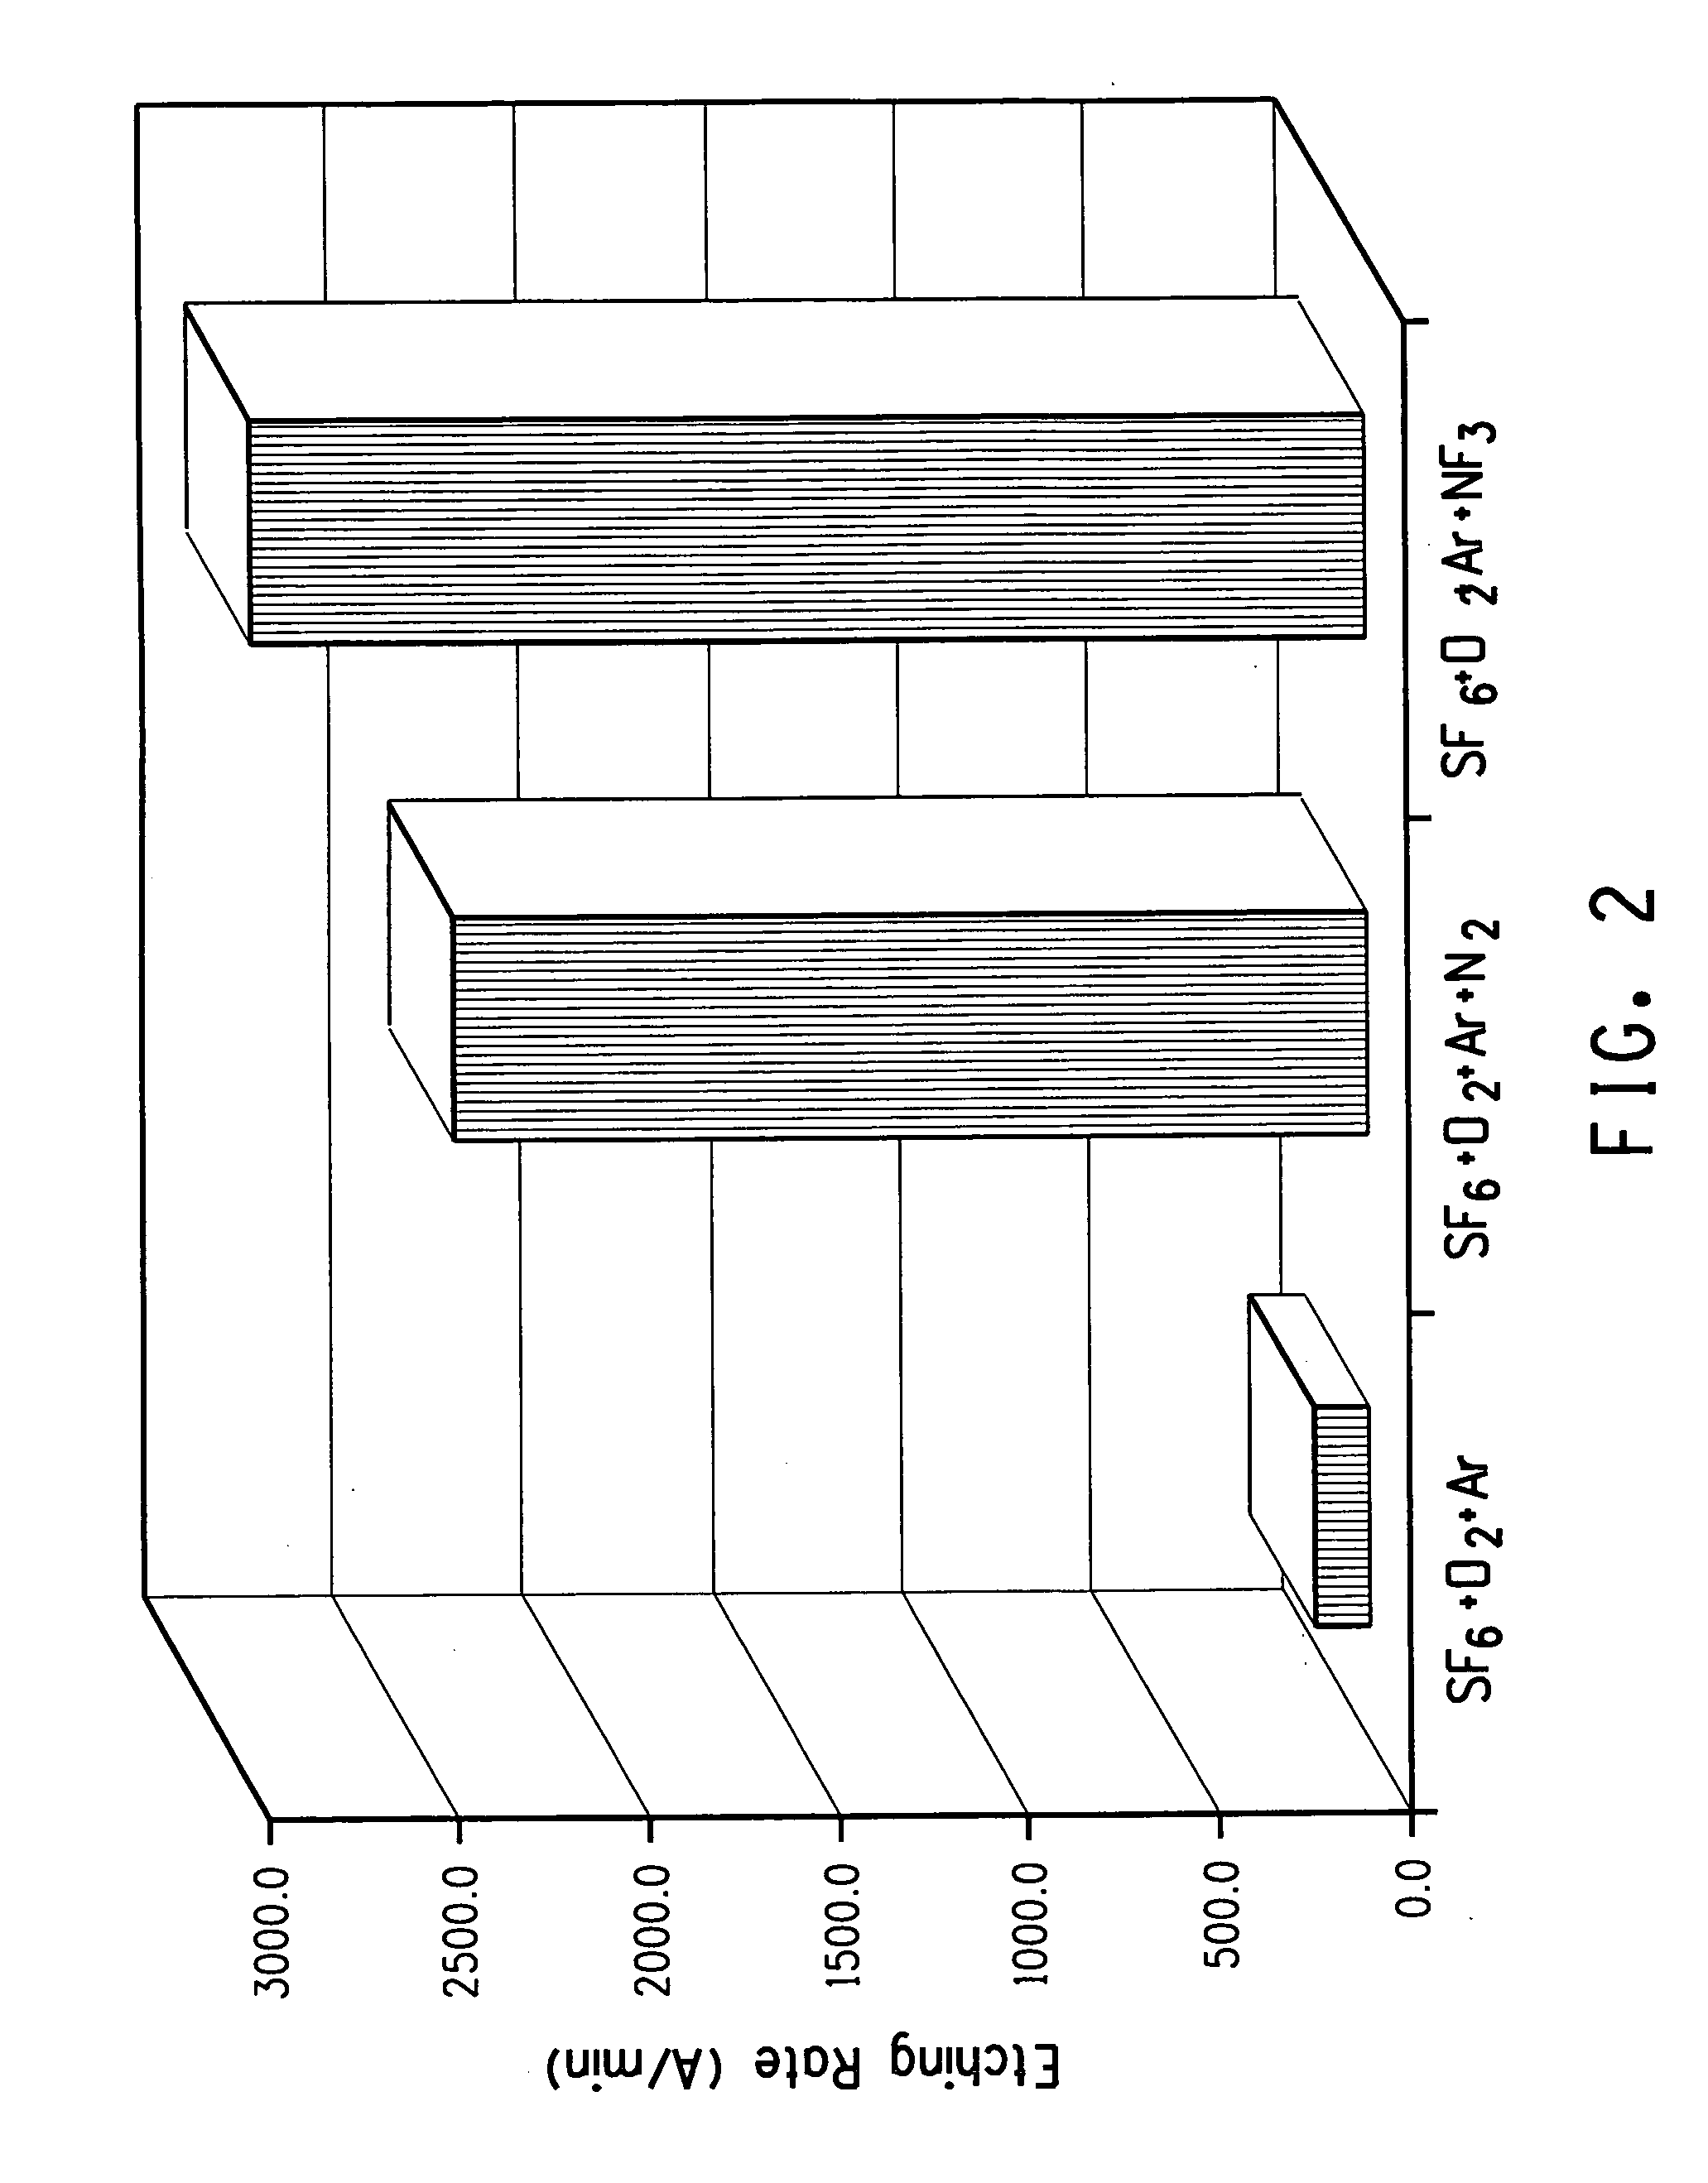 Method of using sulfur fluoride for removing surface deposits